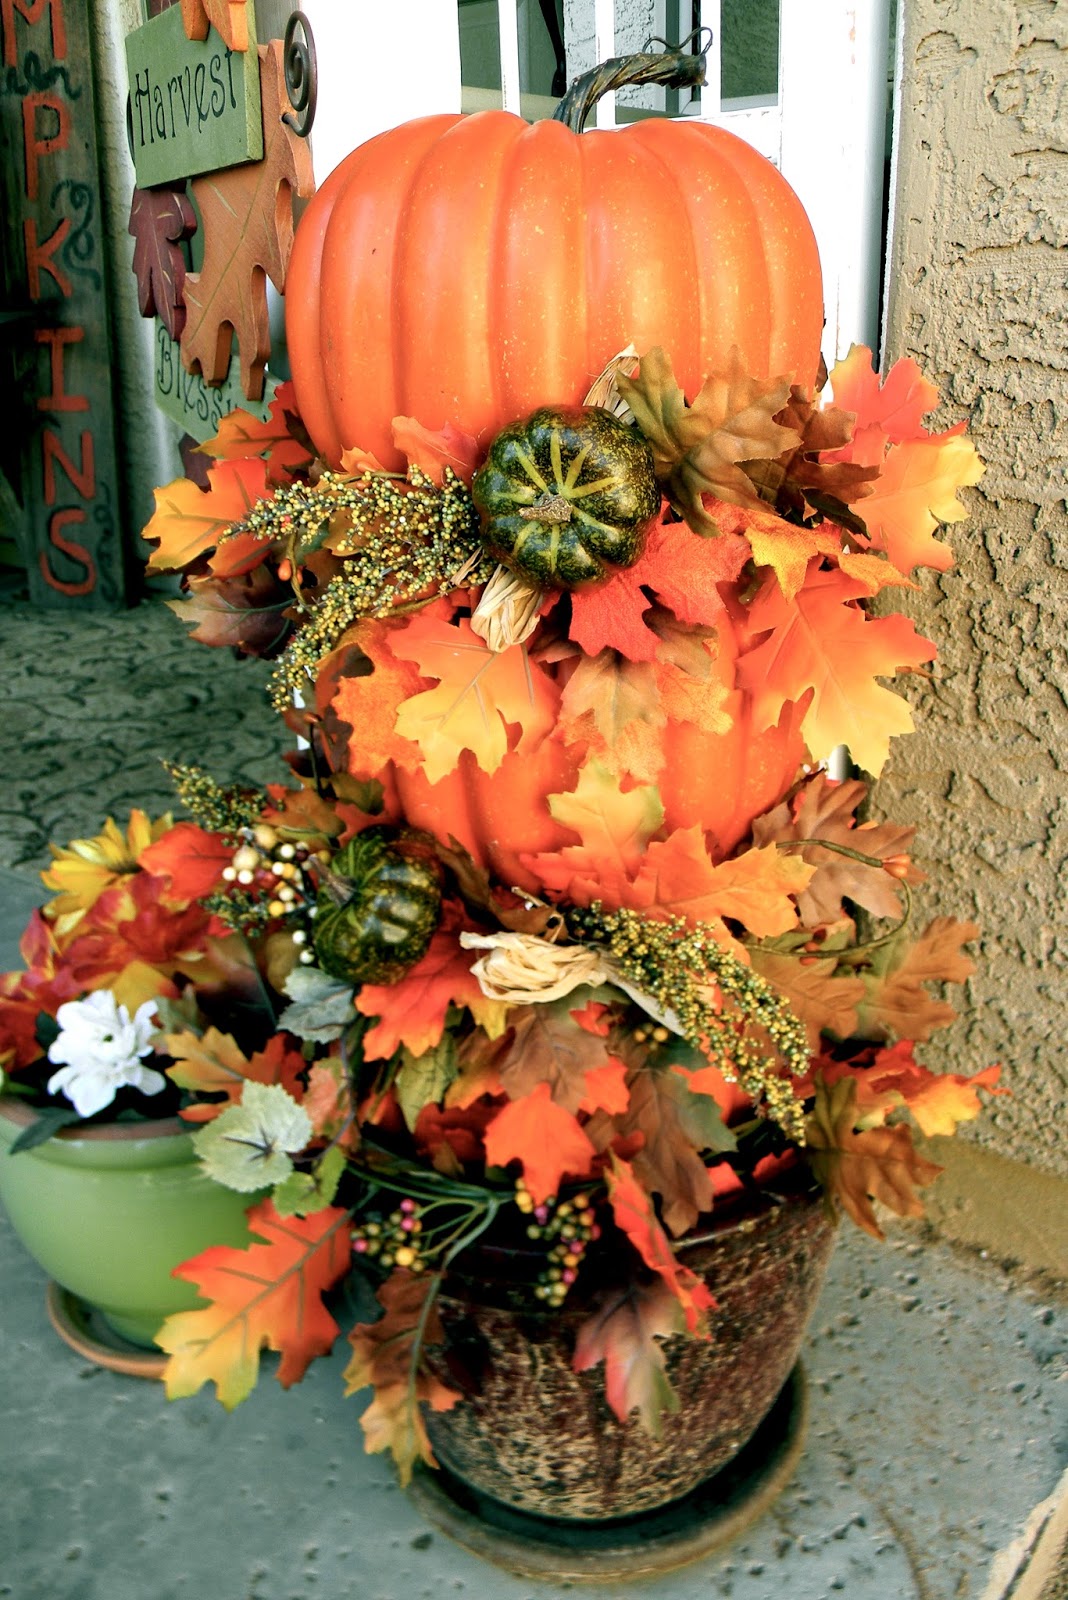 Little Bit of Paint: Thrifty Thursday: DIY Pumpkin Topiary and Fall Porch